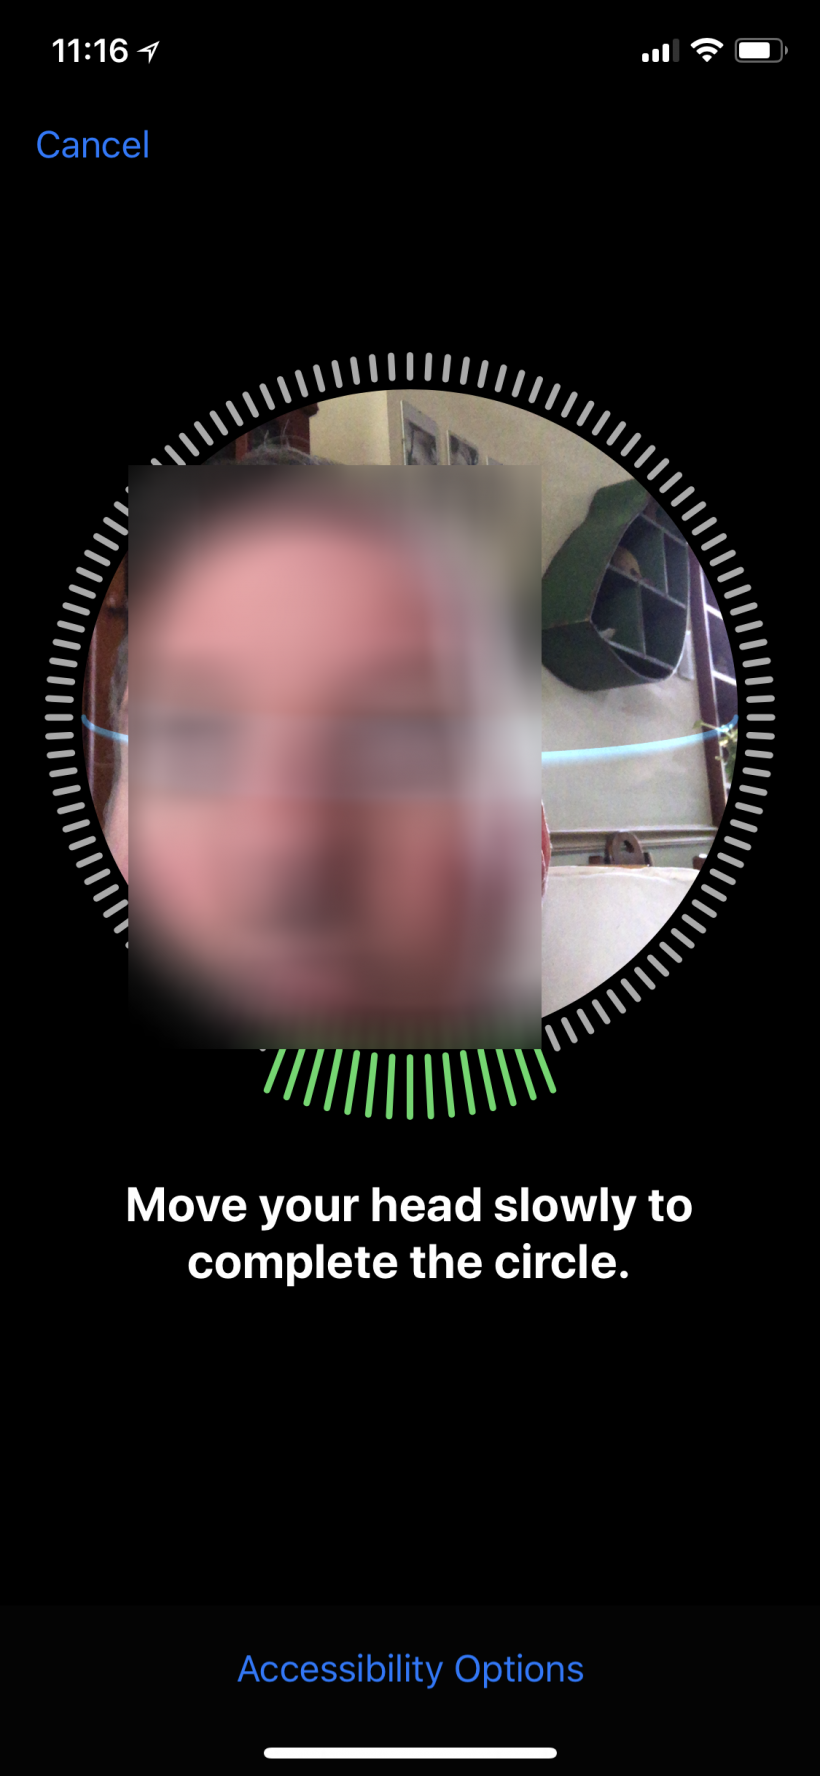 How to set up Face ID on iPhone X.